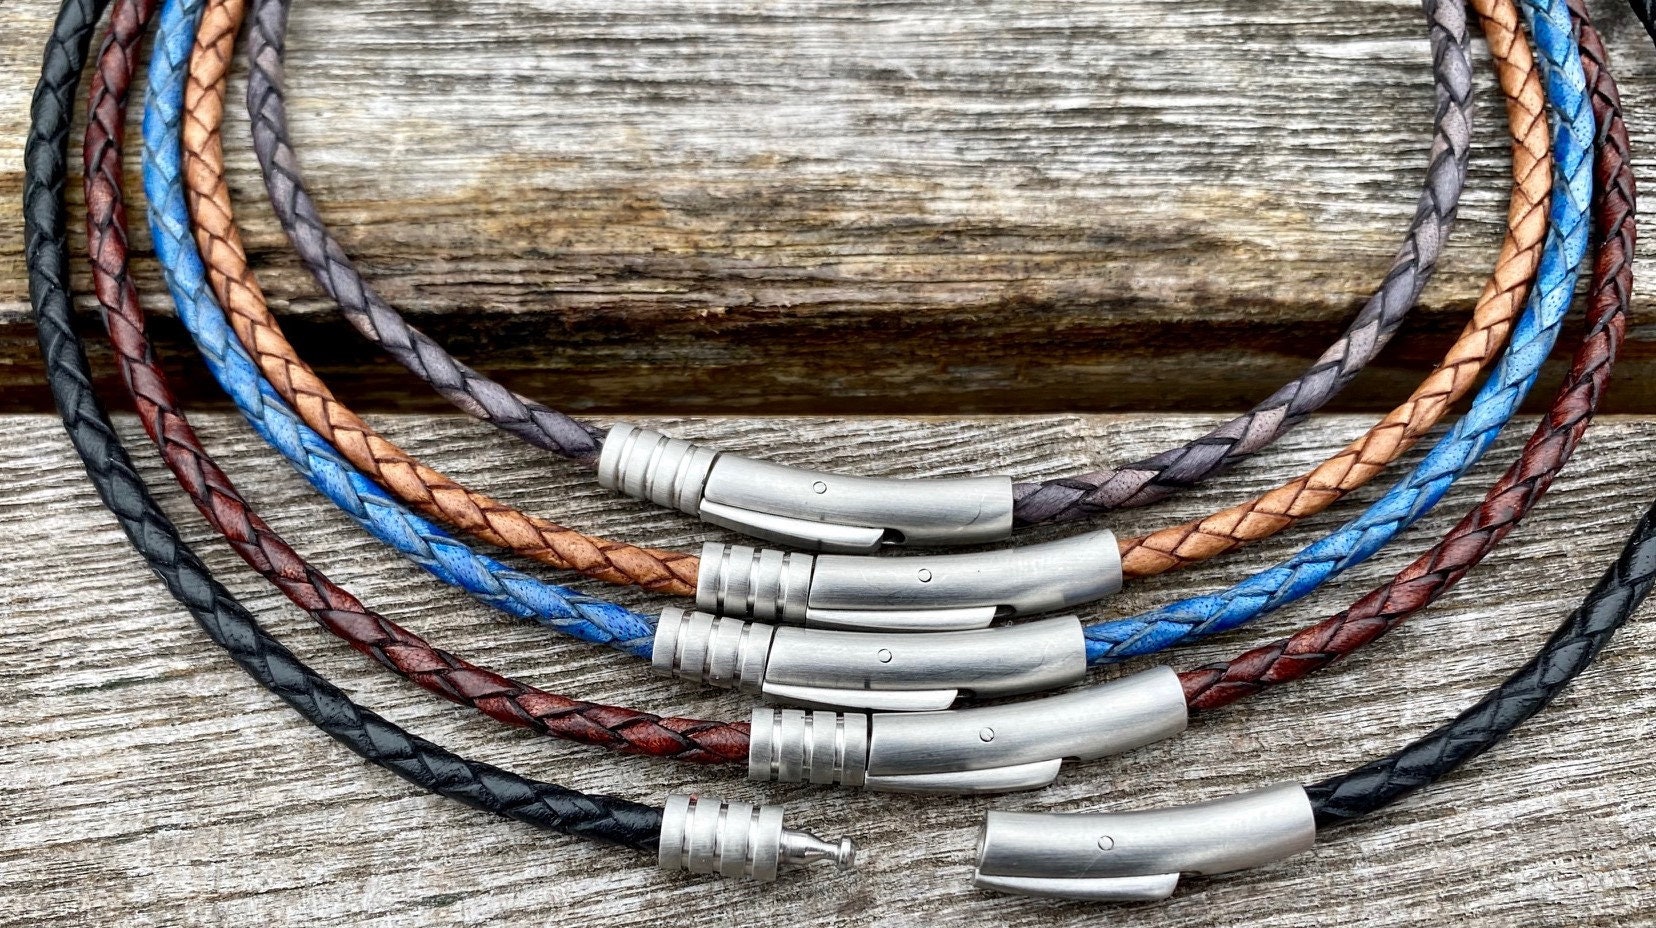 3mm Braided Leather Necklace, Premium European Leather Cord Necklace,  Stainless Steel Clasp, Braided Leather Necklace, FREE SHIPPING USA